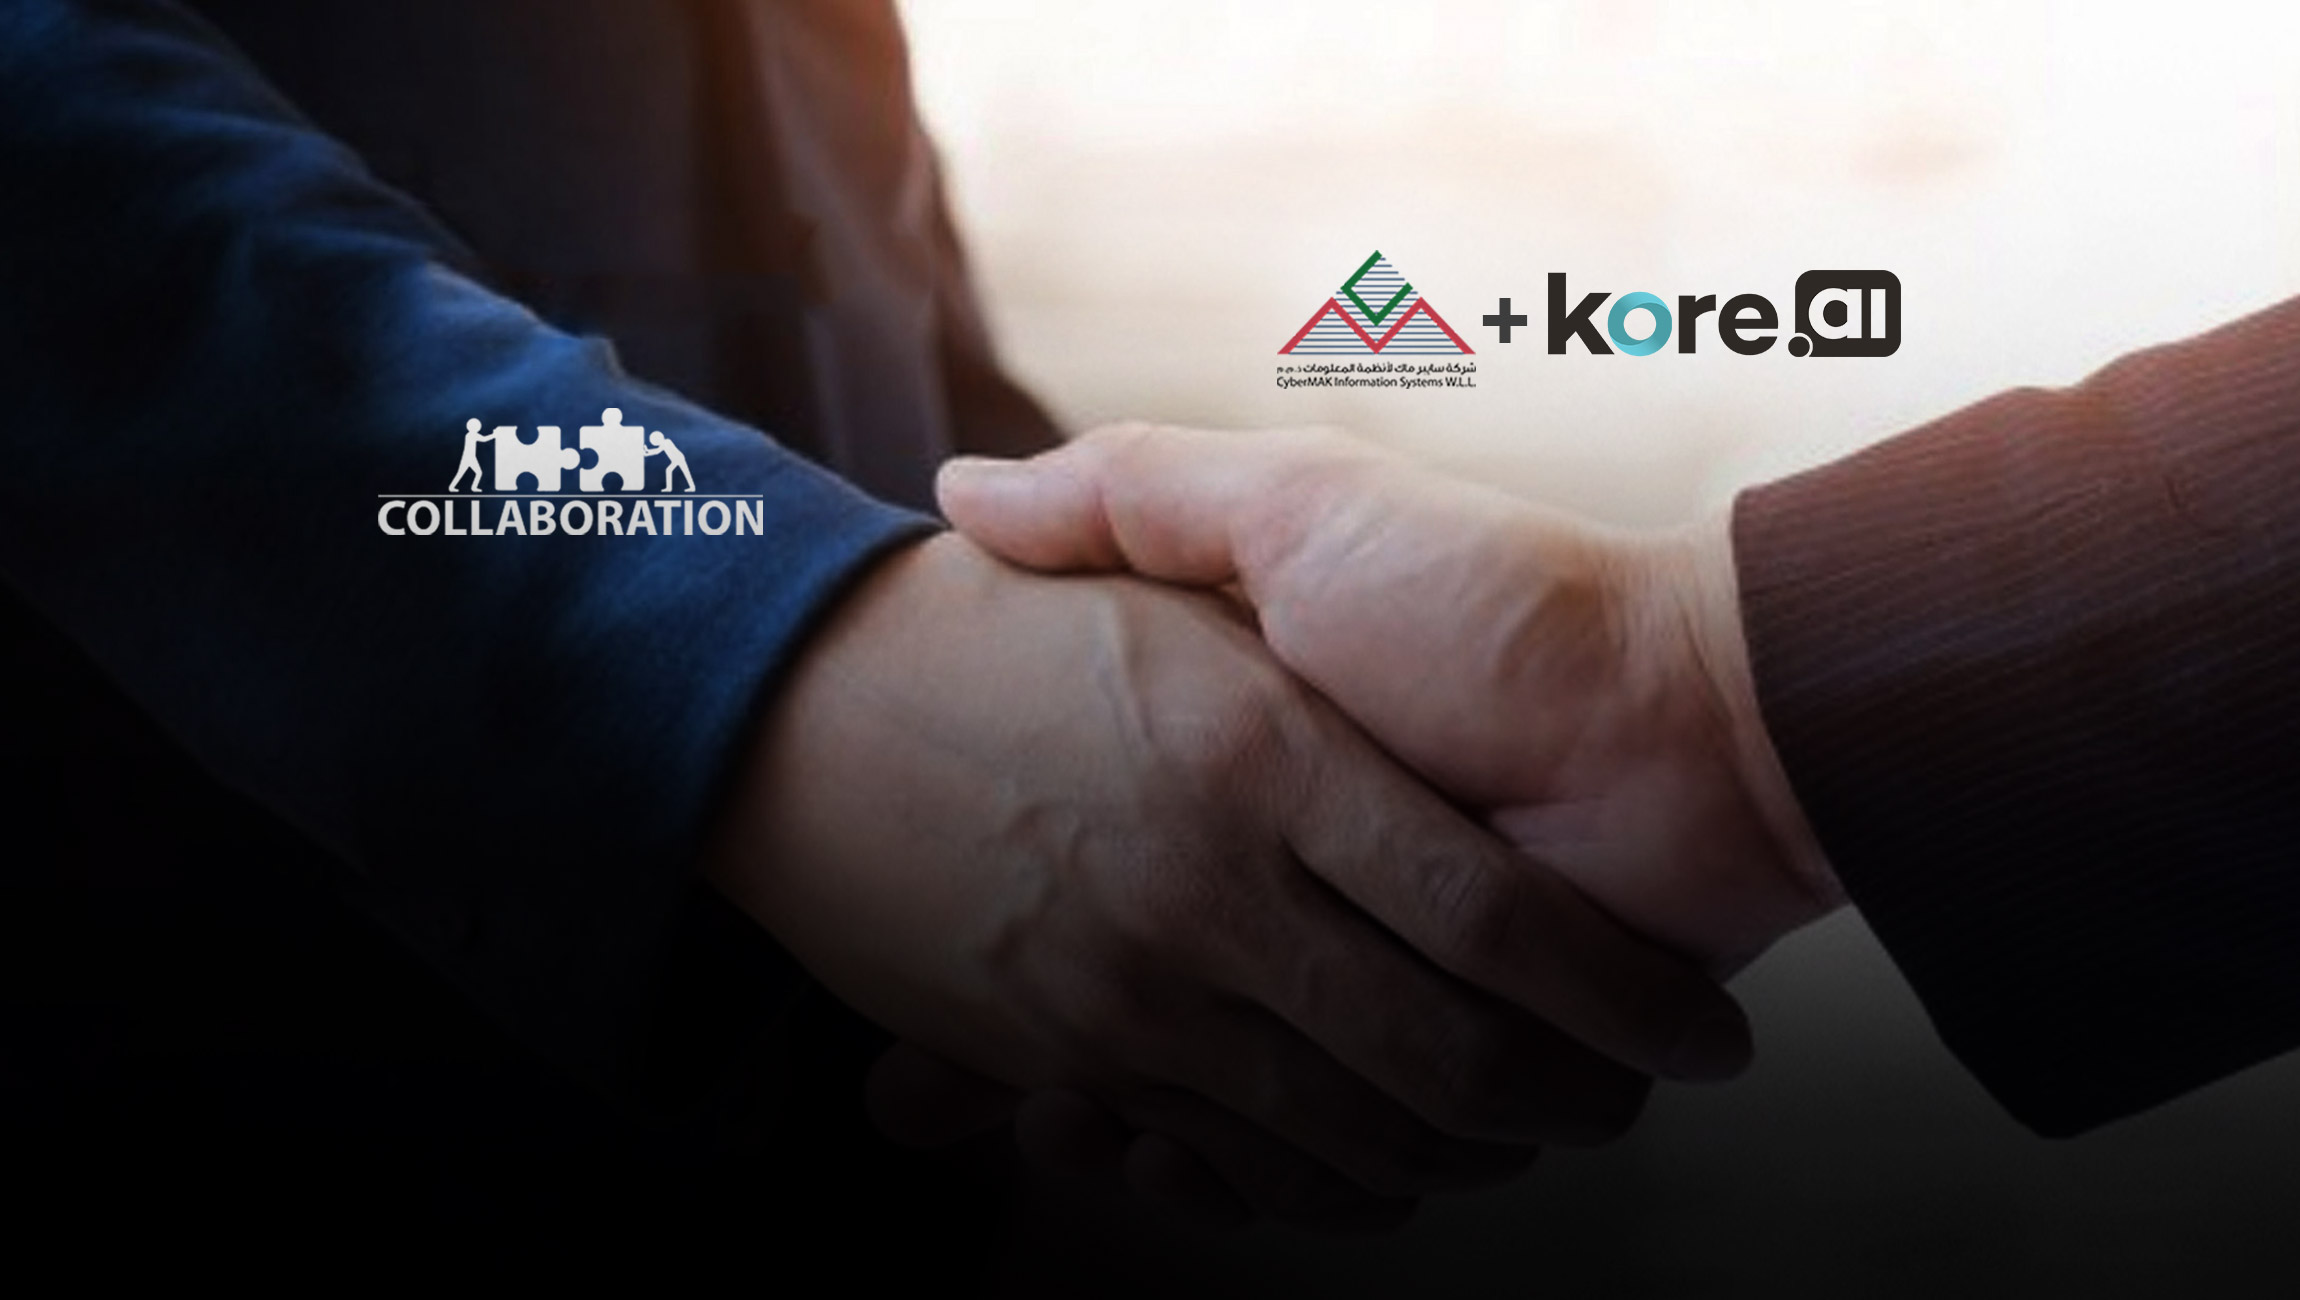 CyberMAK Partners With Kore.ai Offering Conversational AI-powered Chatbots for Digital Transformation